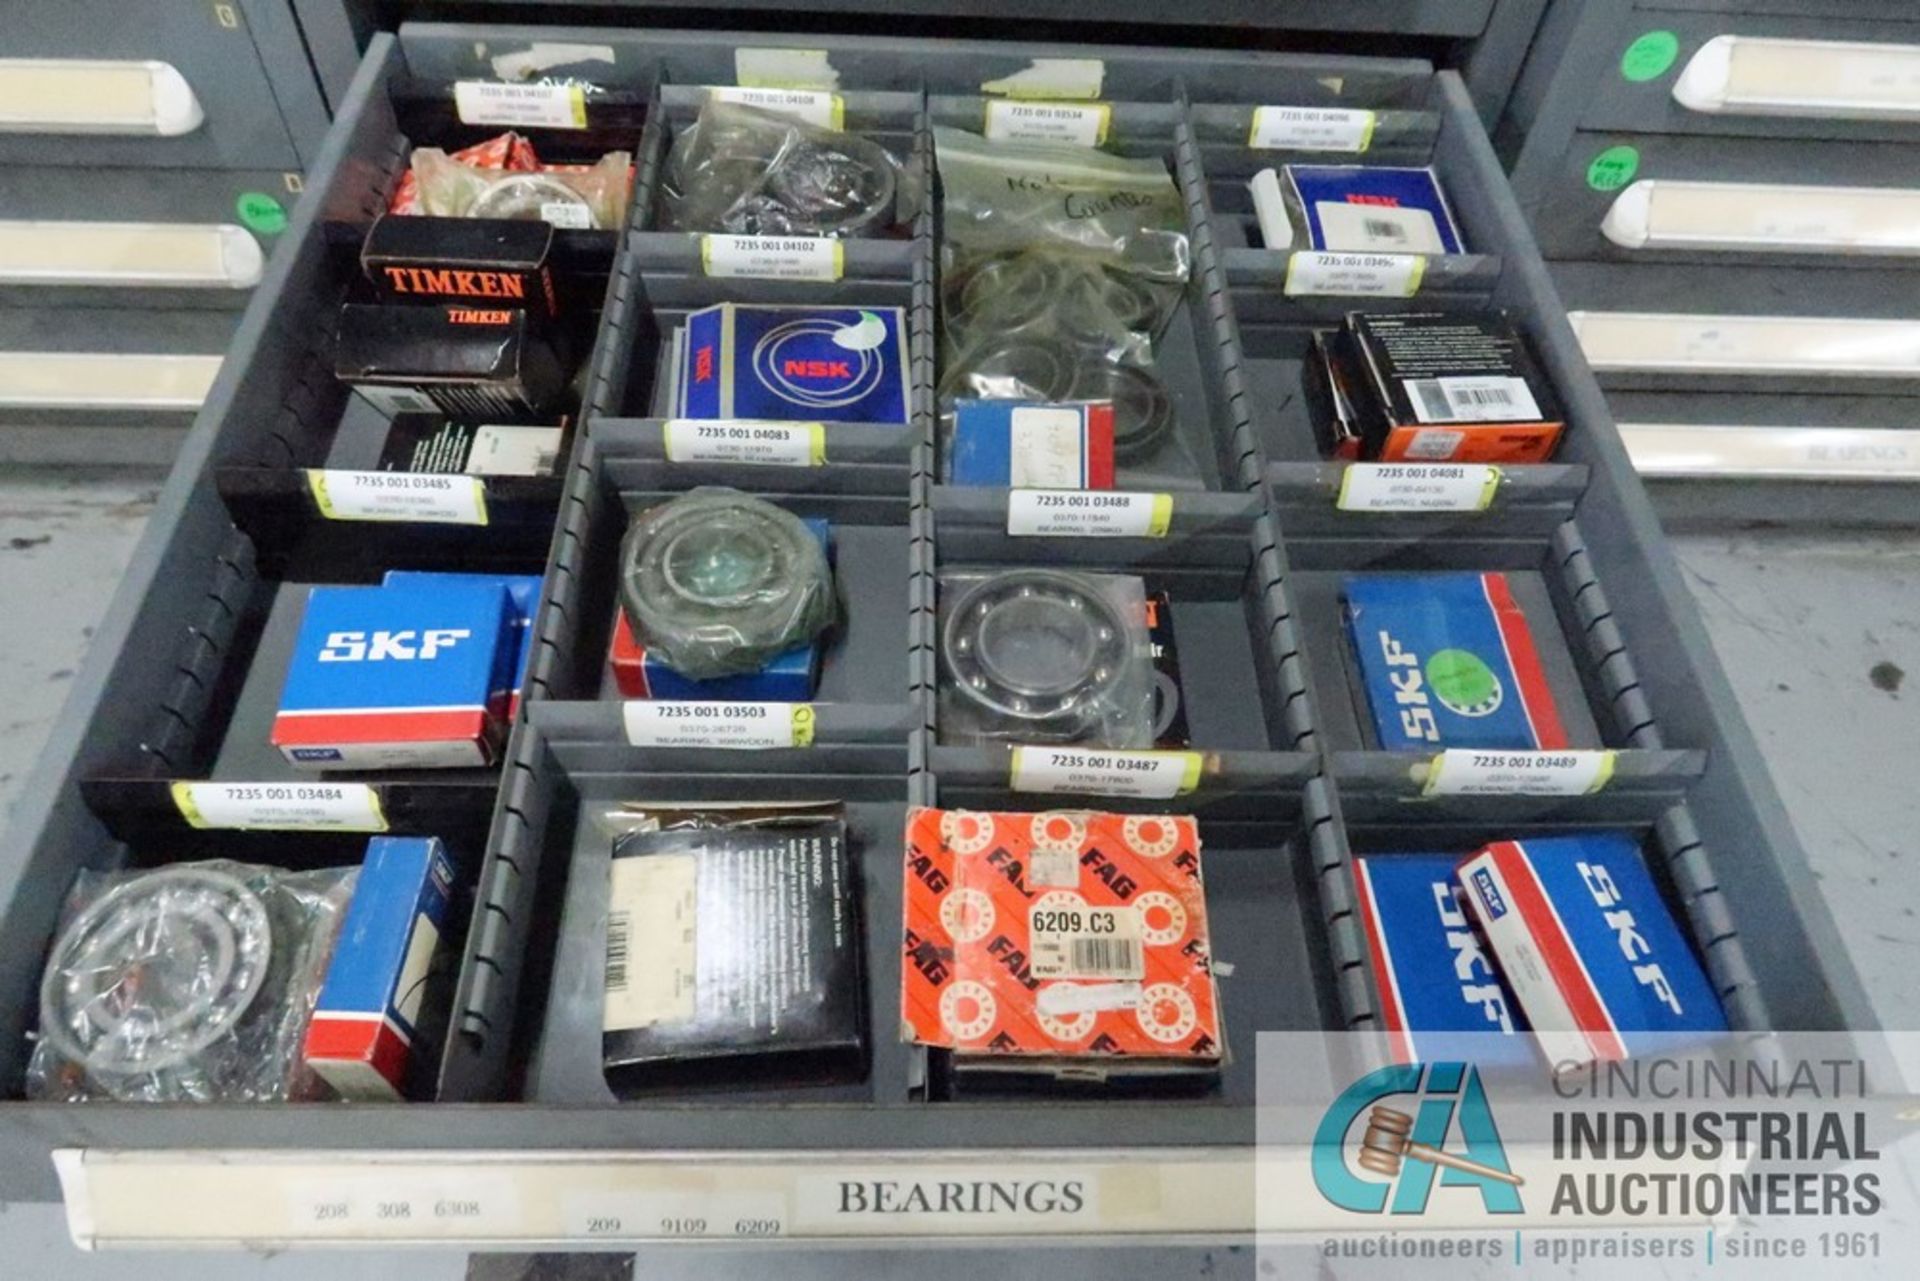 13-DRAWER VIDMAR CABINET WITH CONTENTS INCLUDING MISCELLANEOUS BEARINGS (CABINET CD) - Image 12 of 14